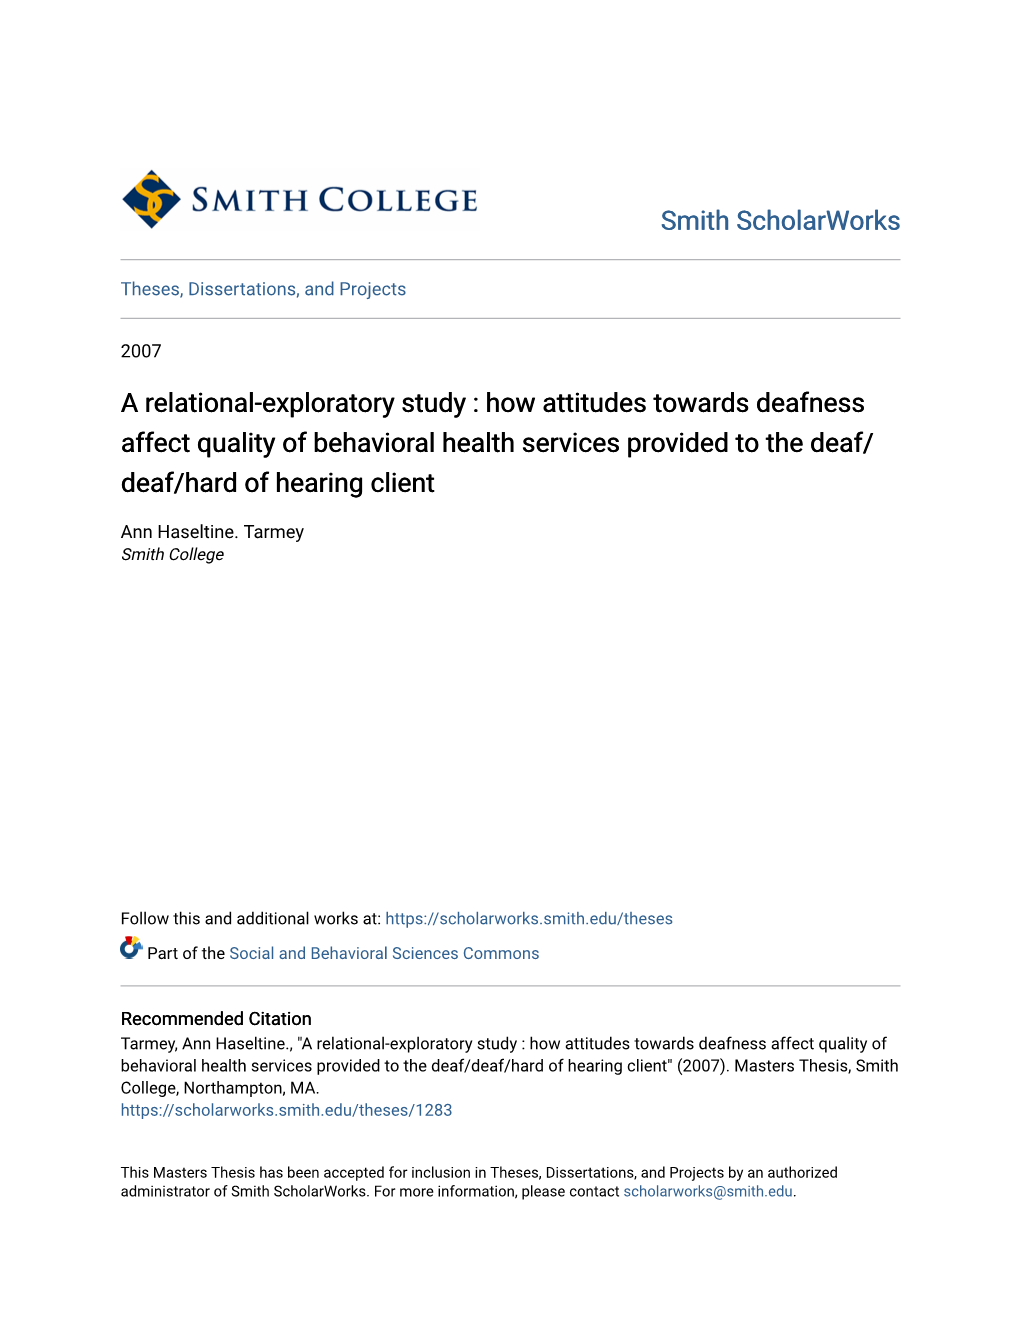 A Relational-Exploratory Study : How Attitudes Towards Deafness Affect Quality of Behavioral Health Services Provided to the Deaf/ Deaf/Hard of Hearing Client